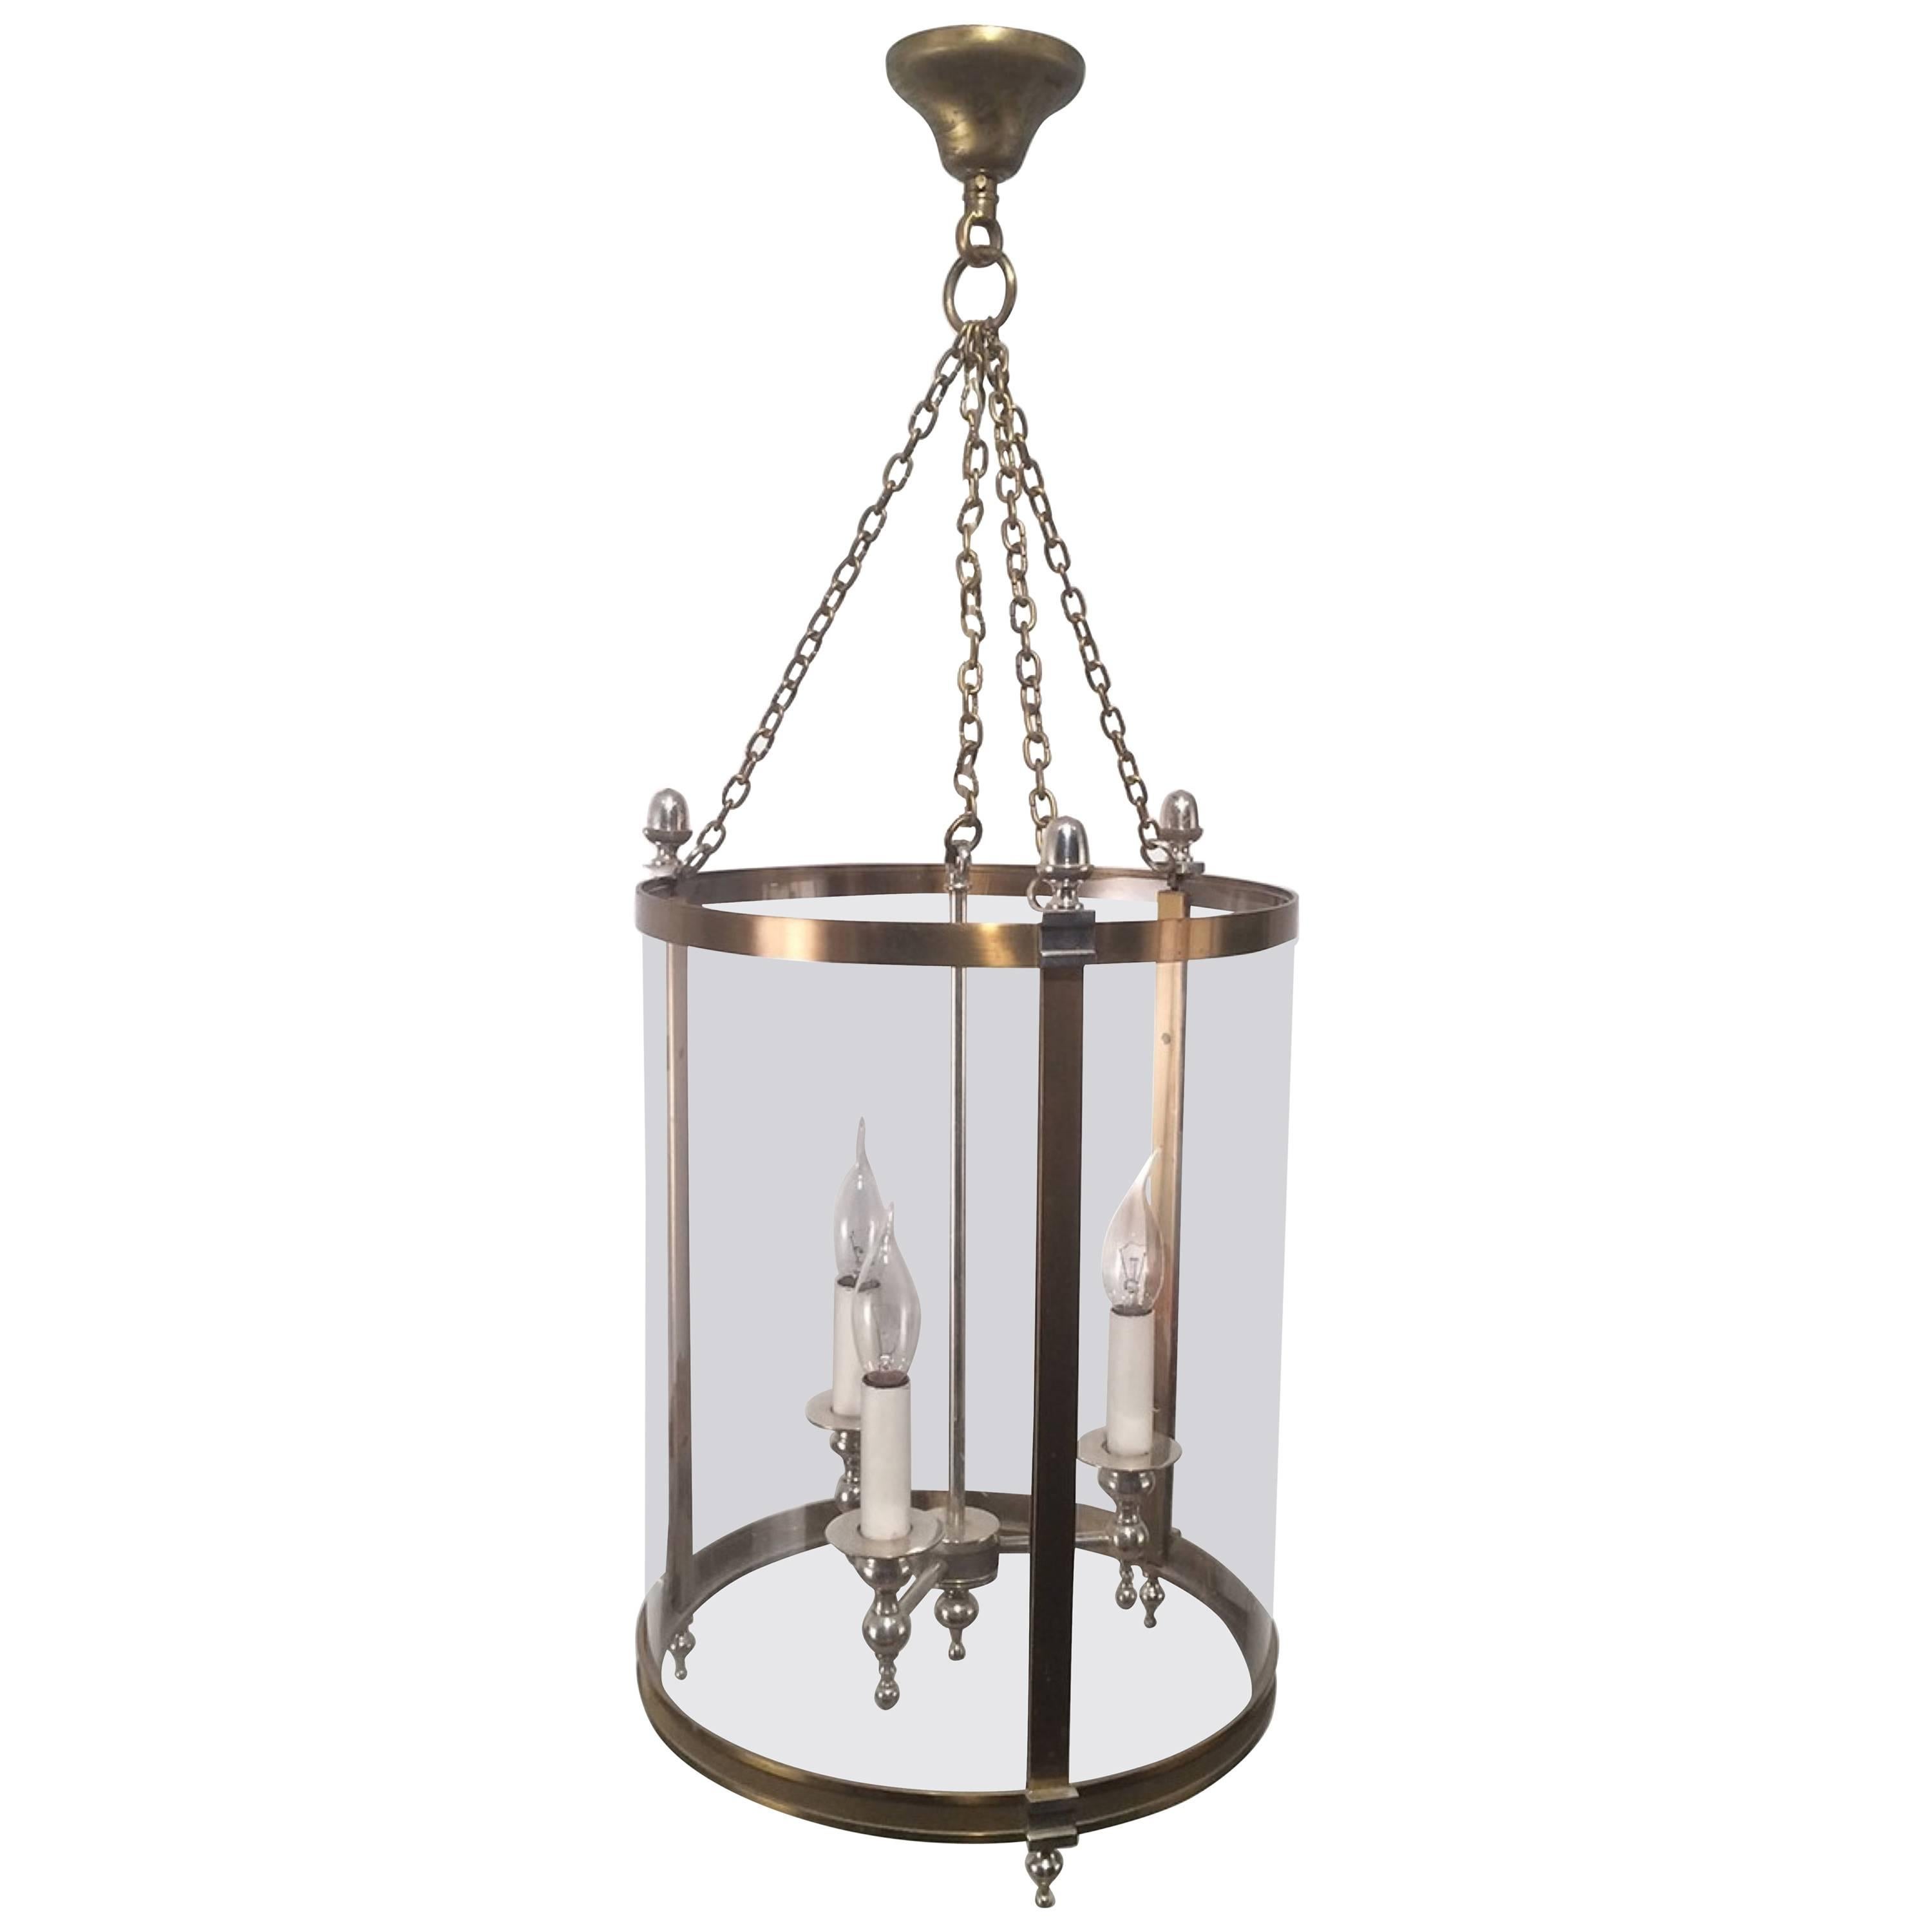 1970s French Neoclassical Style Hanging Lantern